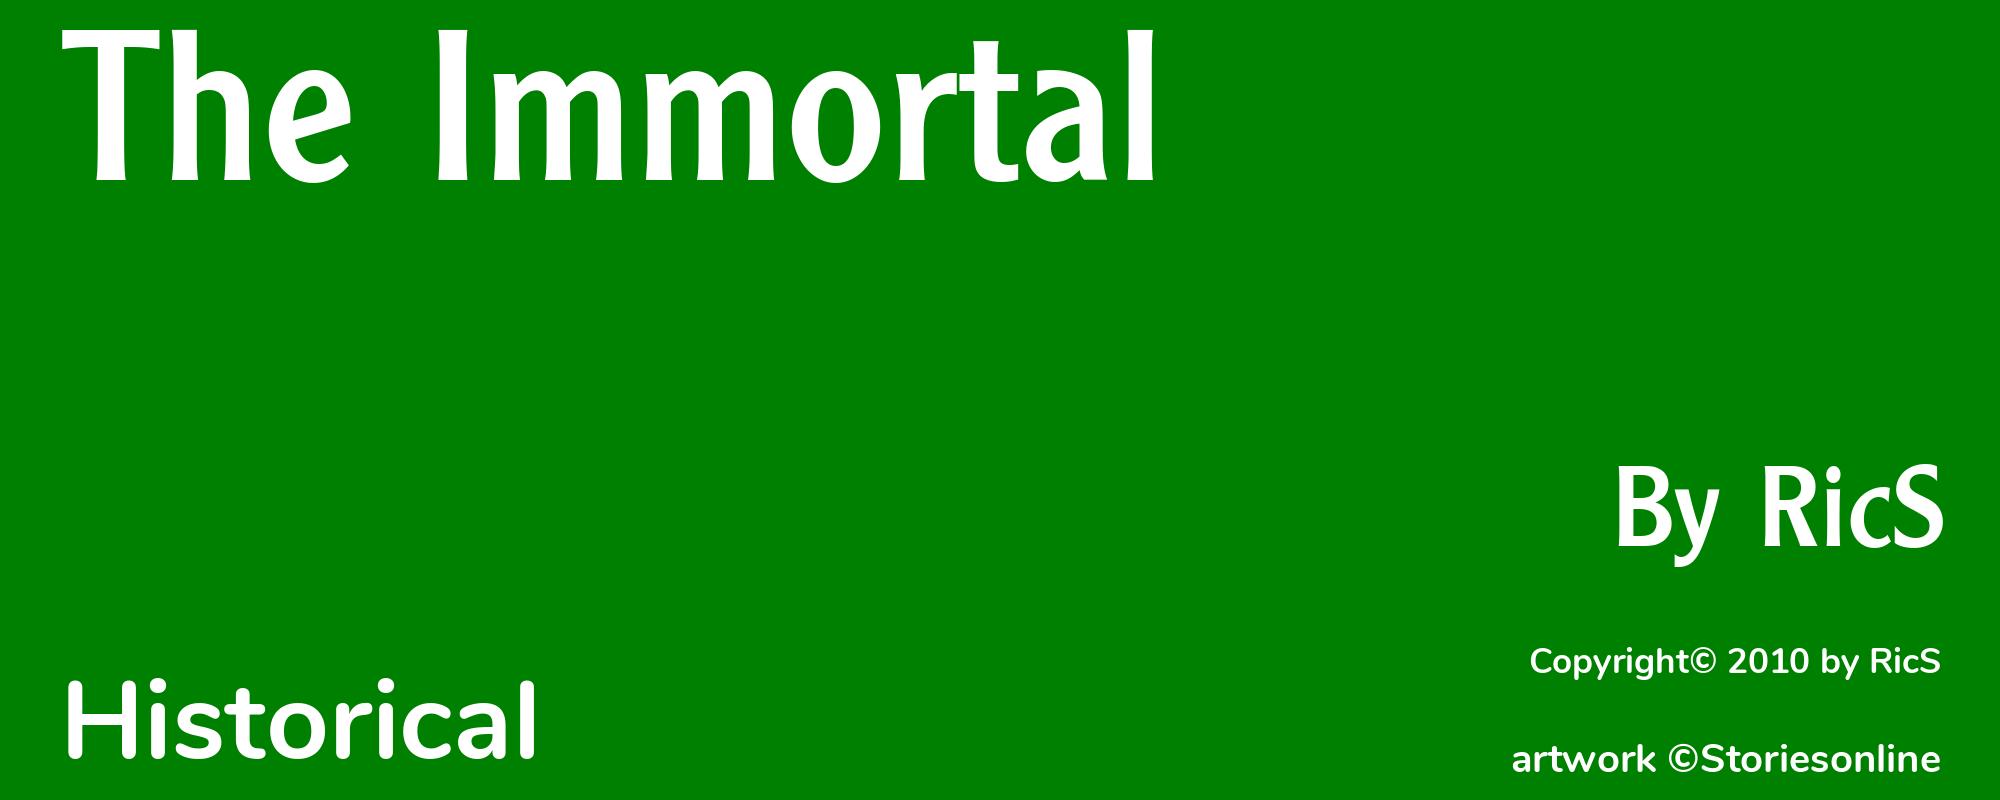 The Immortal - Cover